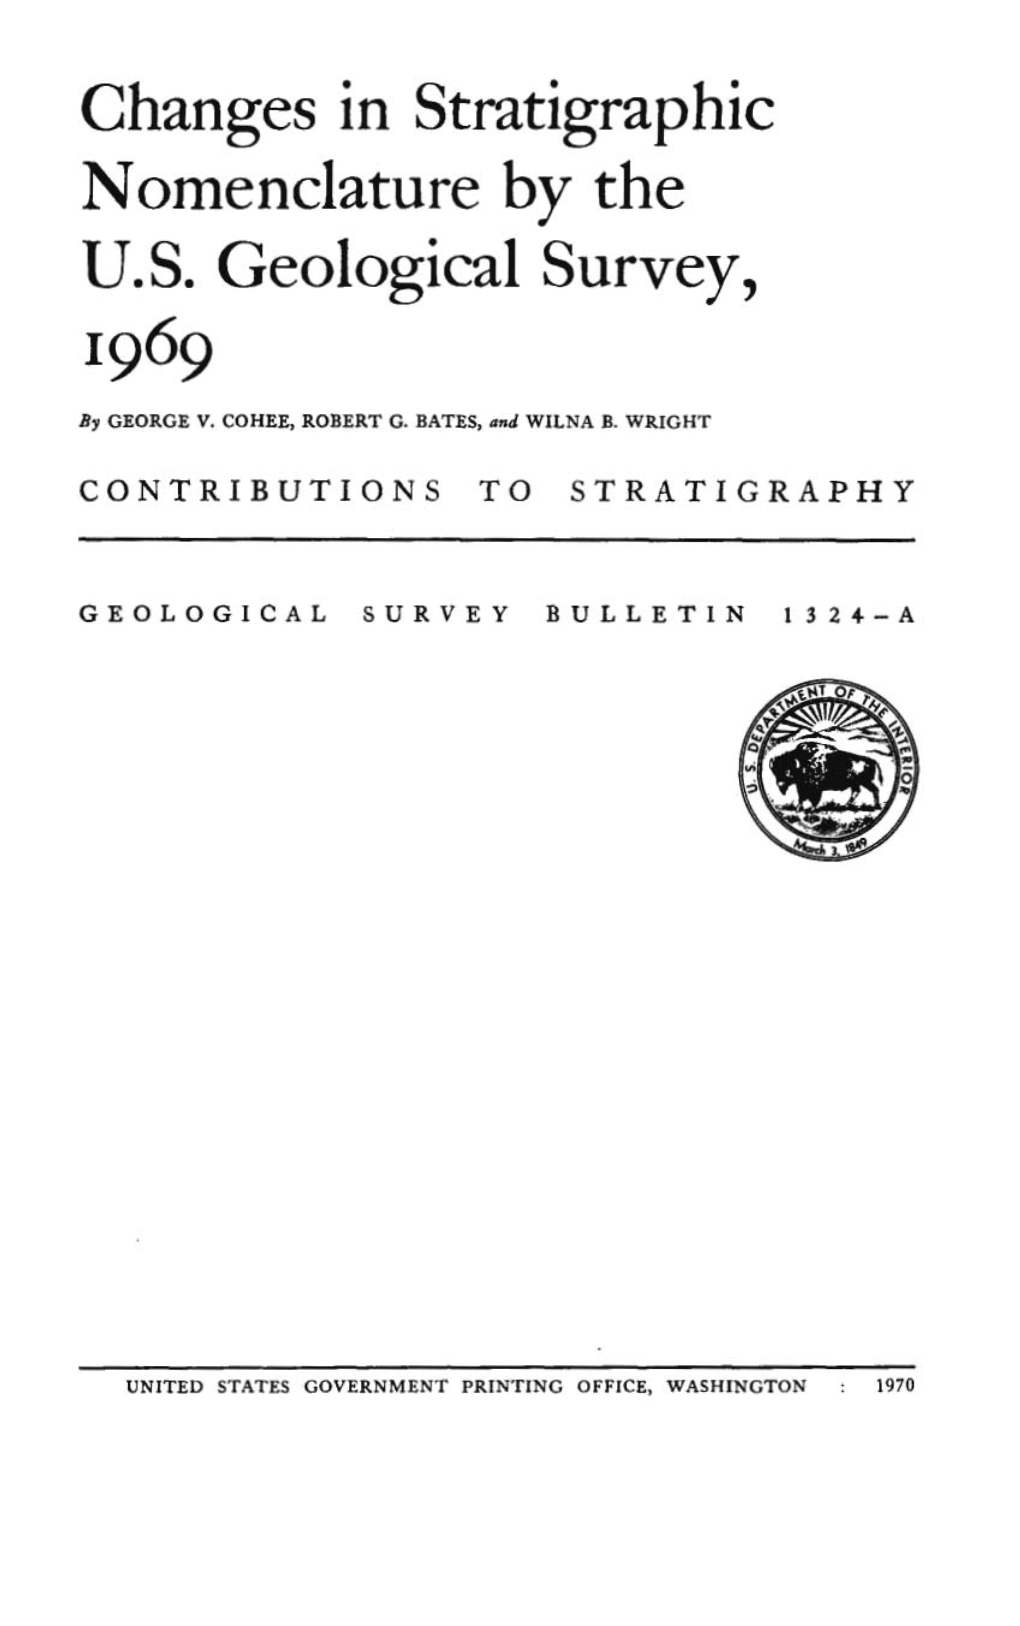 Changes in Stratigraphic Nomenclature by the U.S. Geological Survey